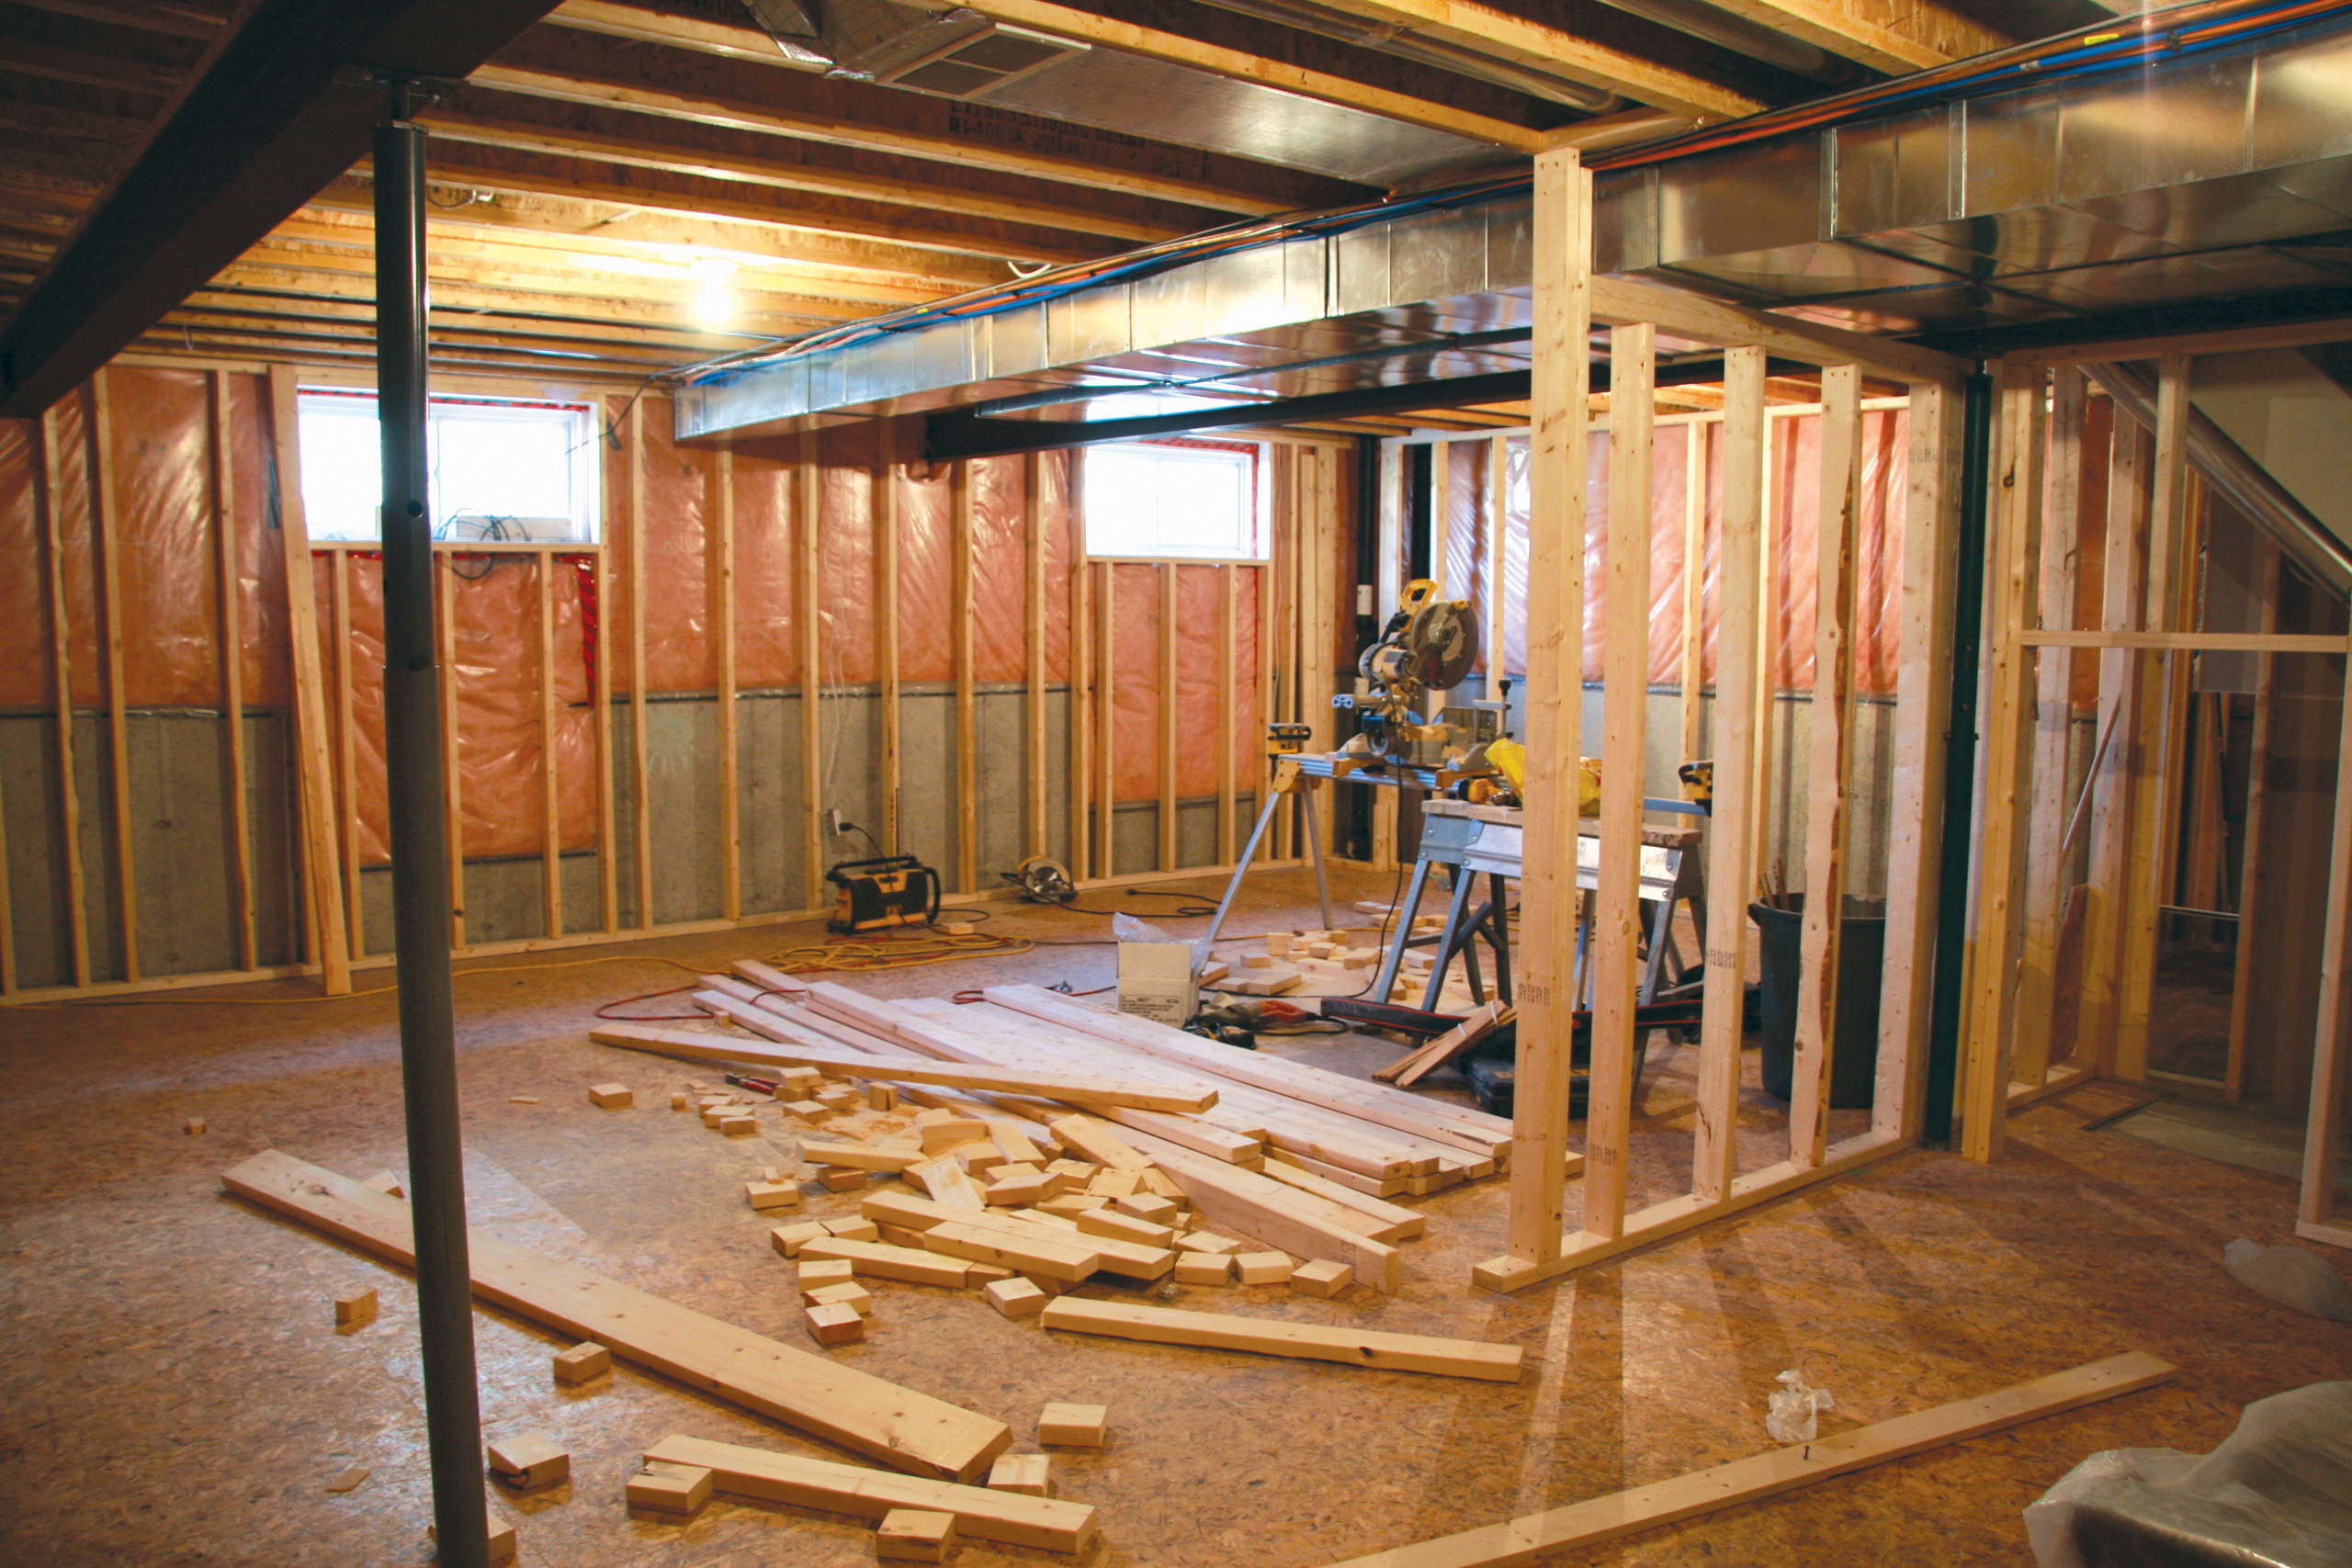 http://americanexpress-construction.com/wp-content/uploads/2015/04/roomaddition1.jpg